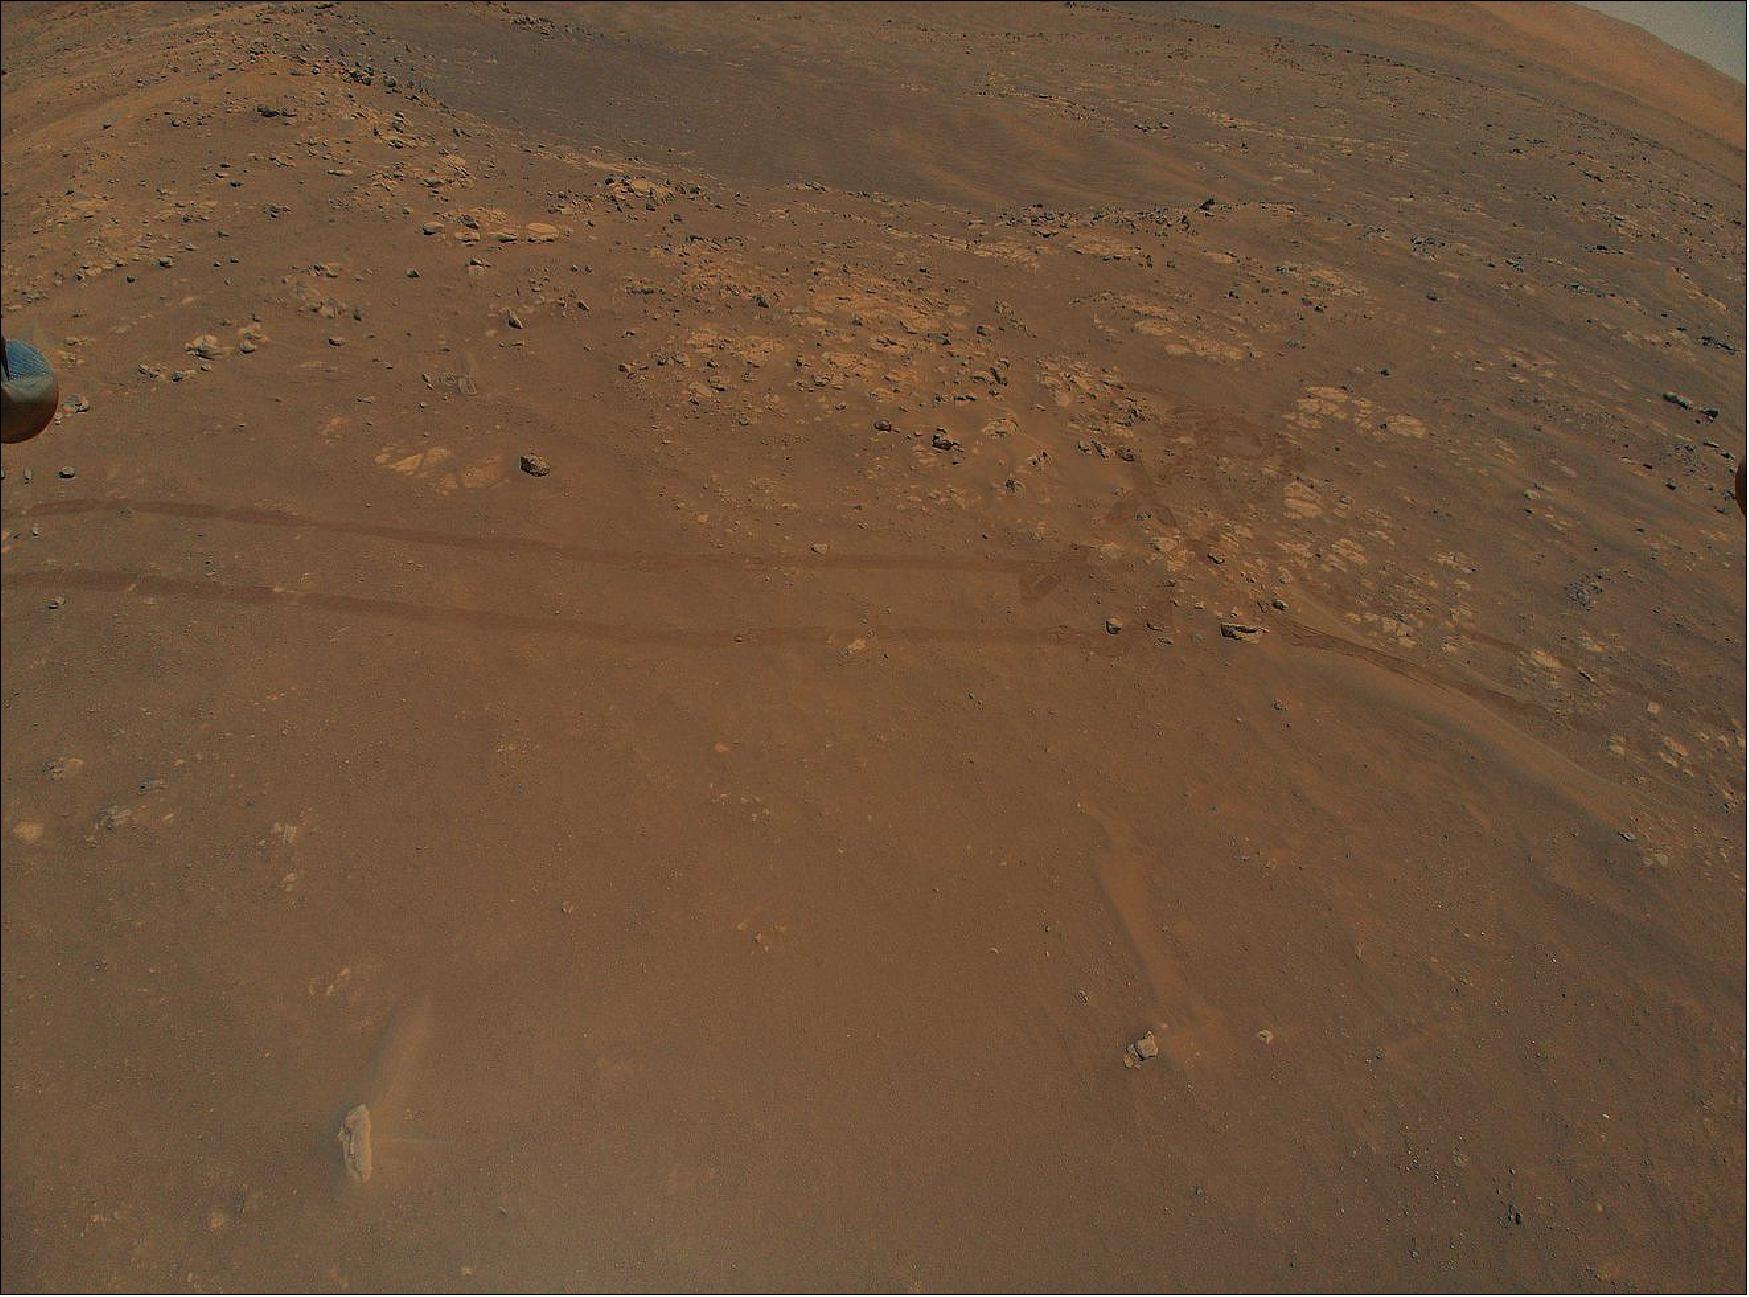 Figure 20: NASA's Ingenuity Mars Helicopter captured this image of tracks made by the Perseverance rover during its ninth flight, on July 5. A portion of the helicopter's landing gear can be seen at top left (image credit: NASA/JPL-Caltech)